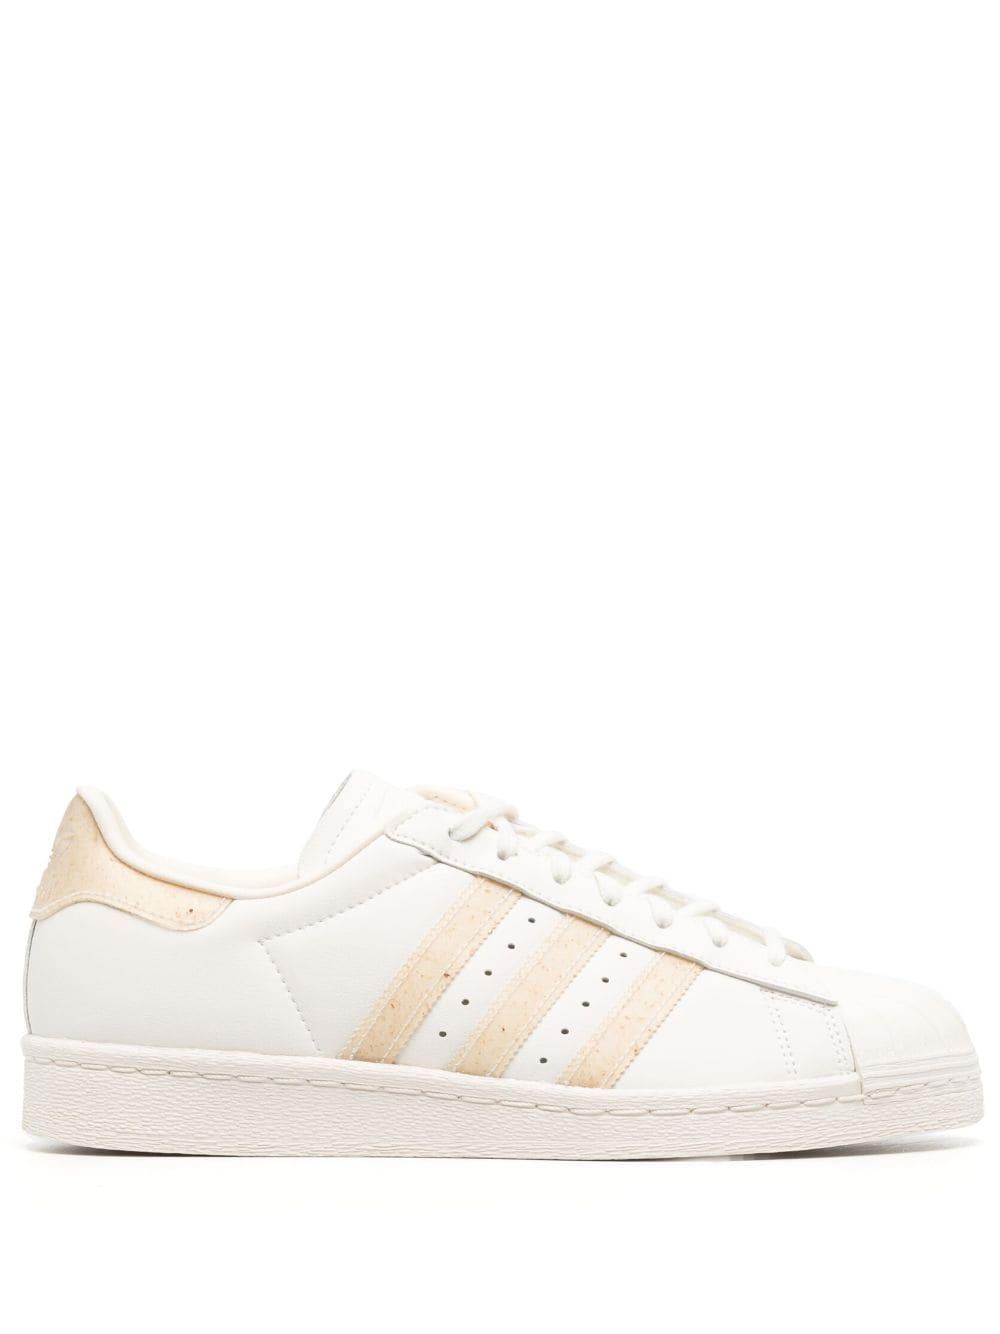 adidas Superstar 82 Low-top Sneakers in Natural | Lyst